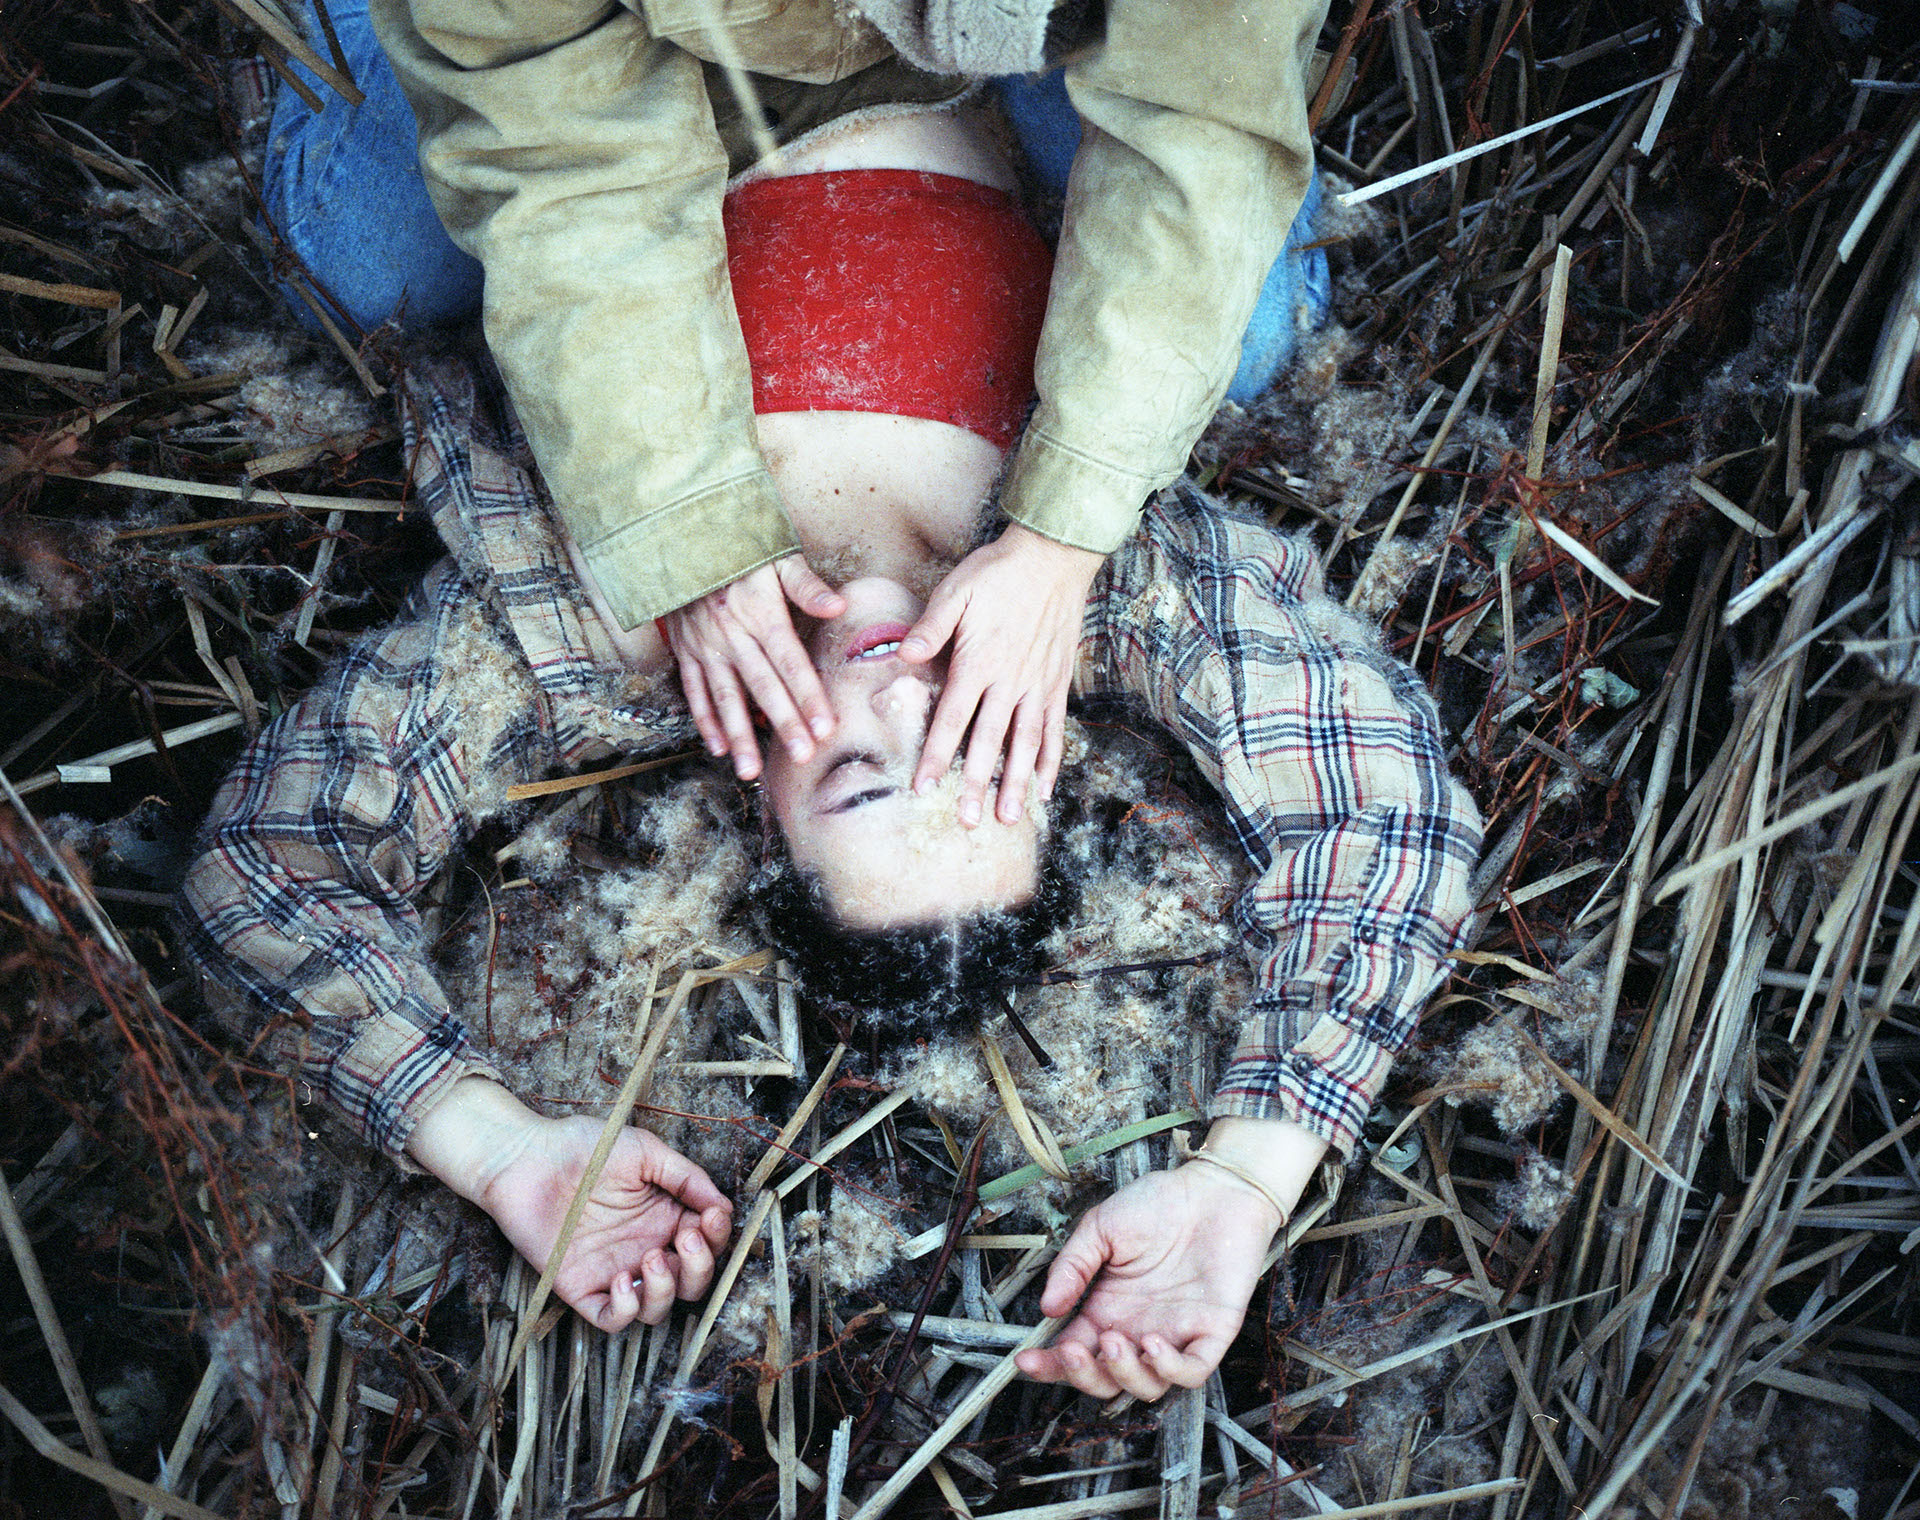 A person laying in a field with another person's hands on their face